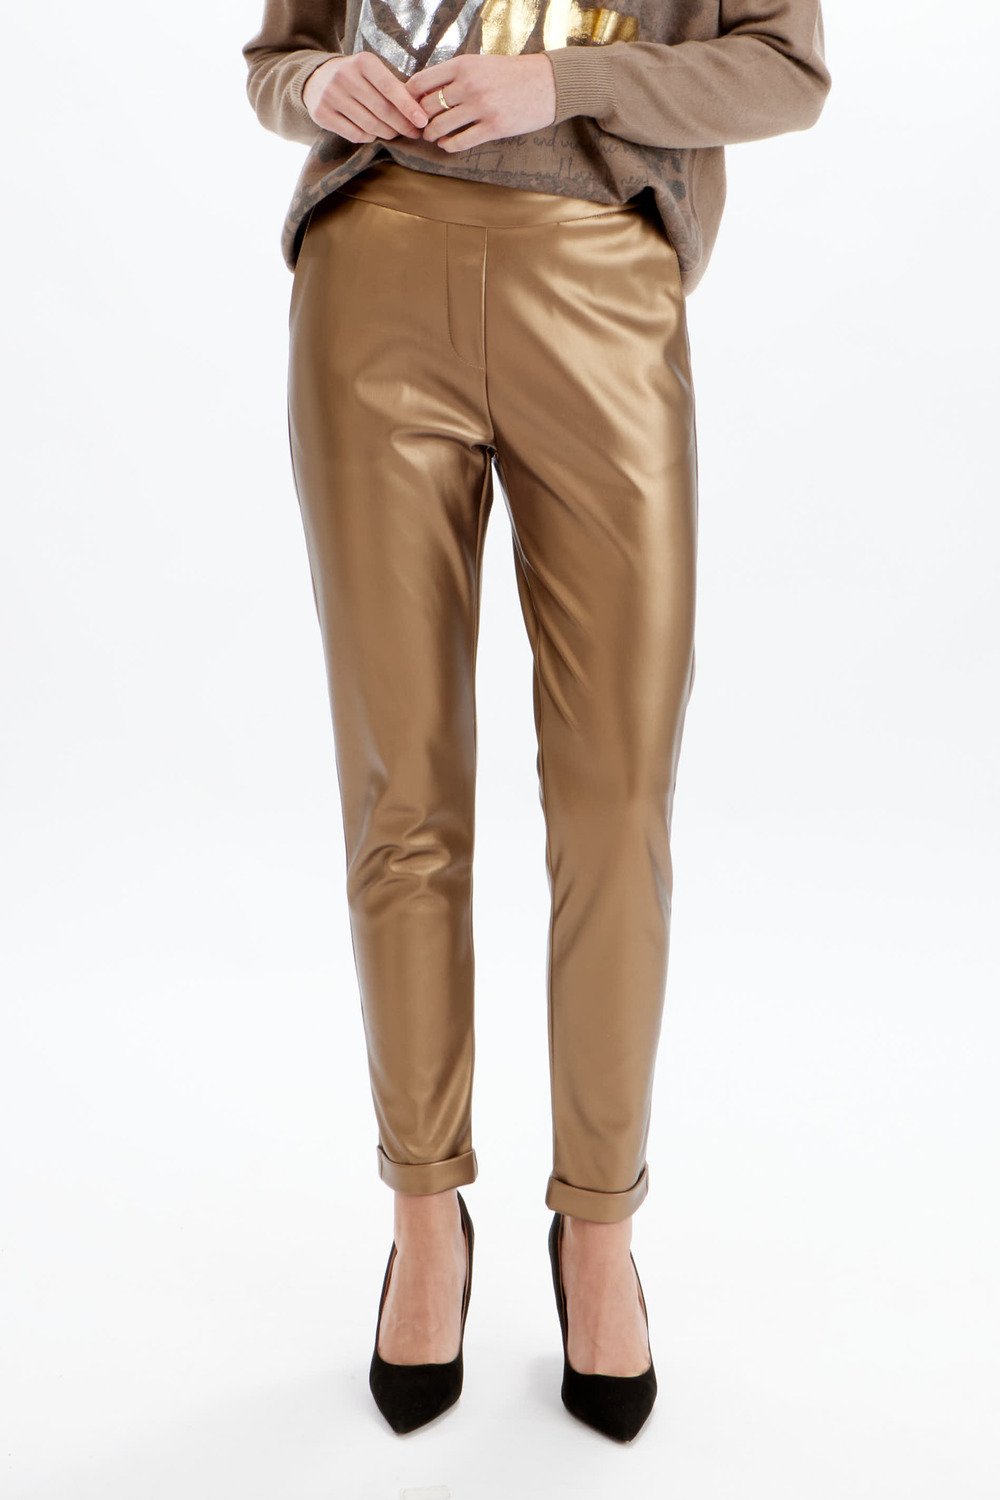 Fitted Satin Pants Style 704-10. Antique Gold